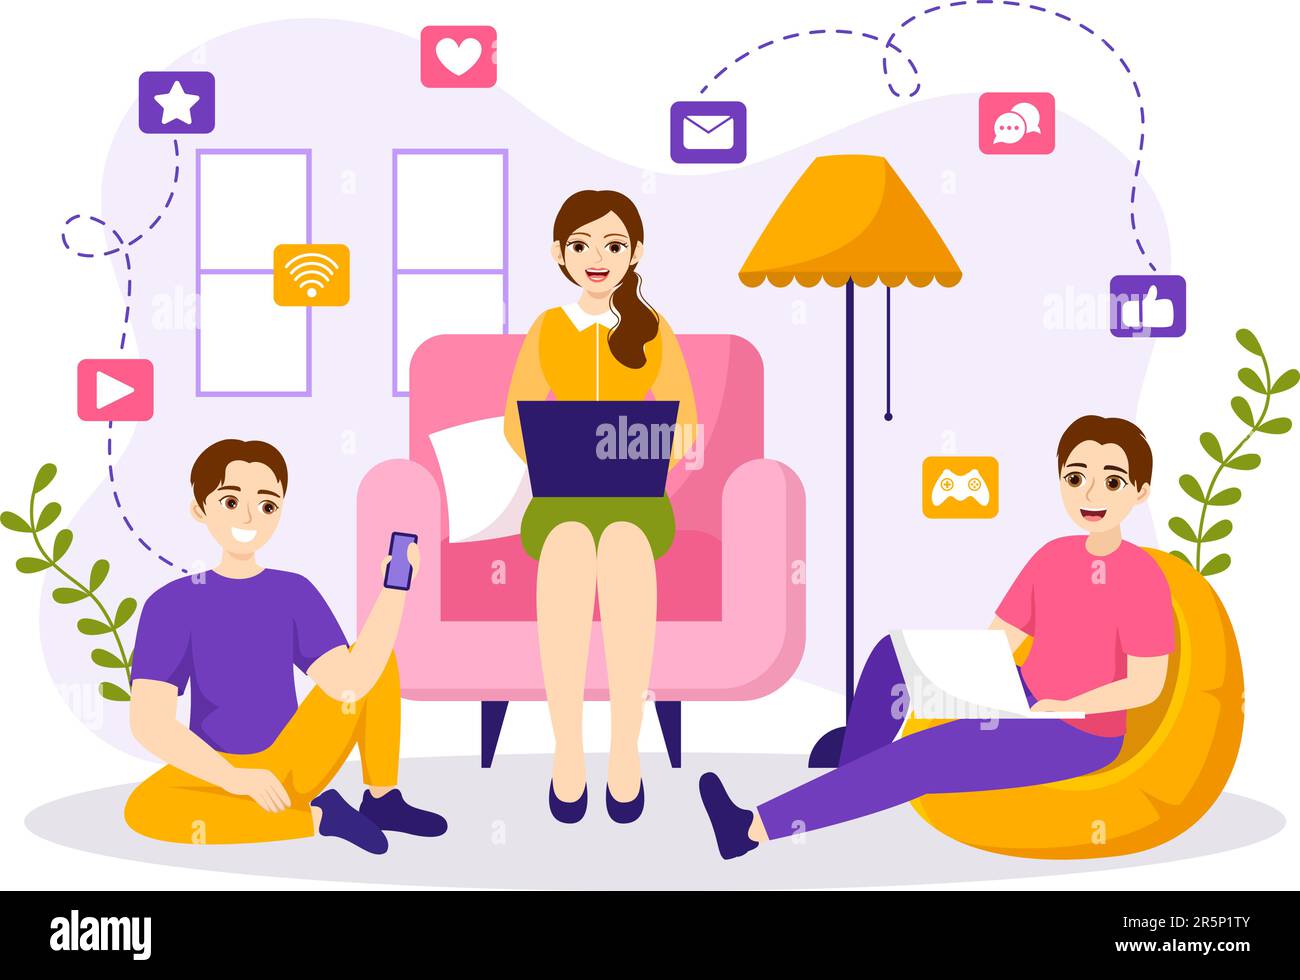 Internet Addiction Vector Illustration With Young People Addicted To